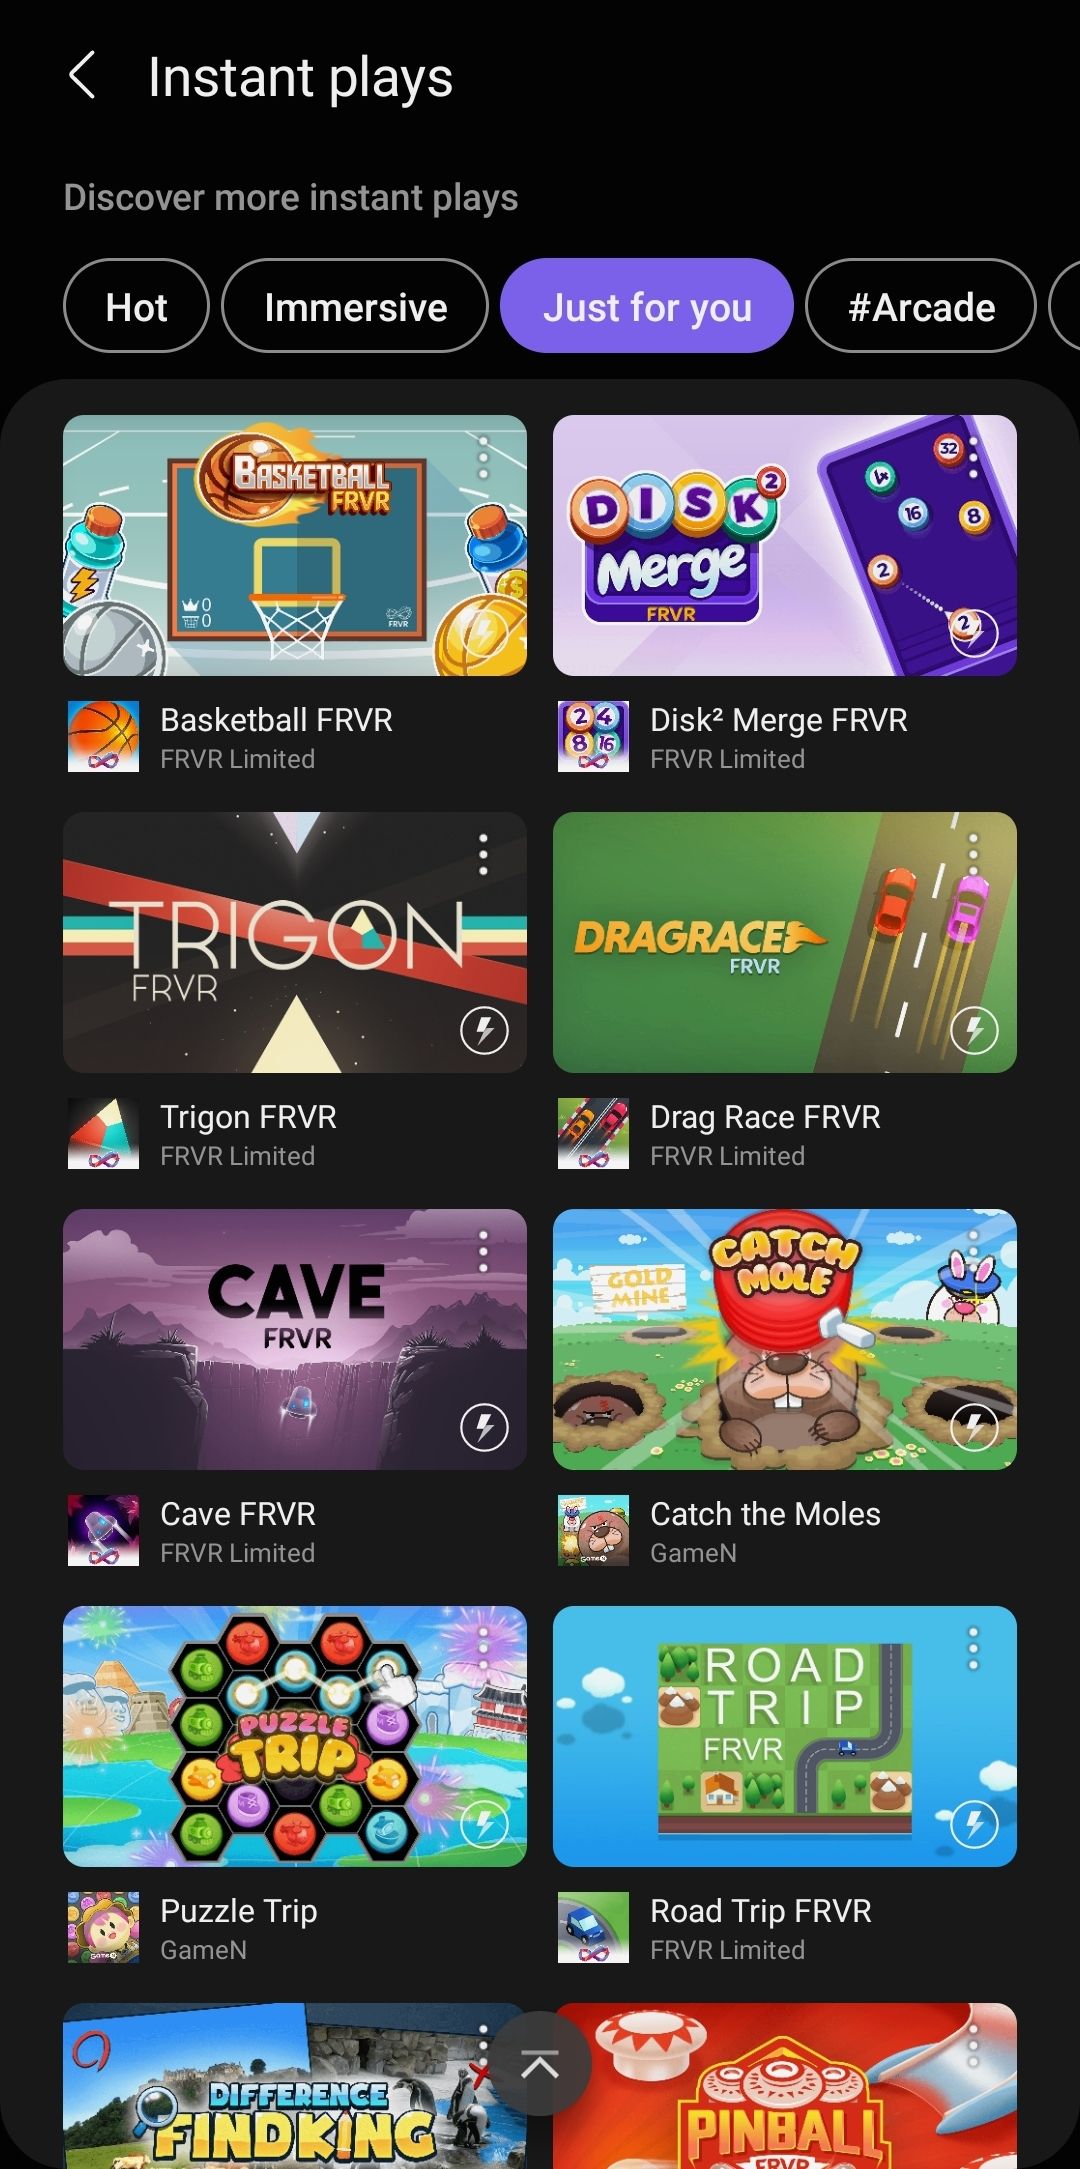 Game Launcher's discover feature has a limited range of games and tags